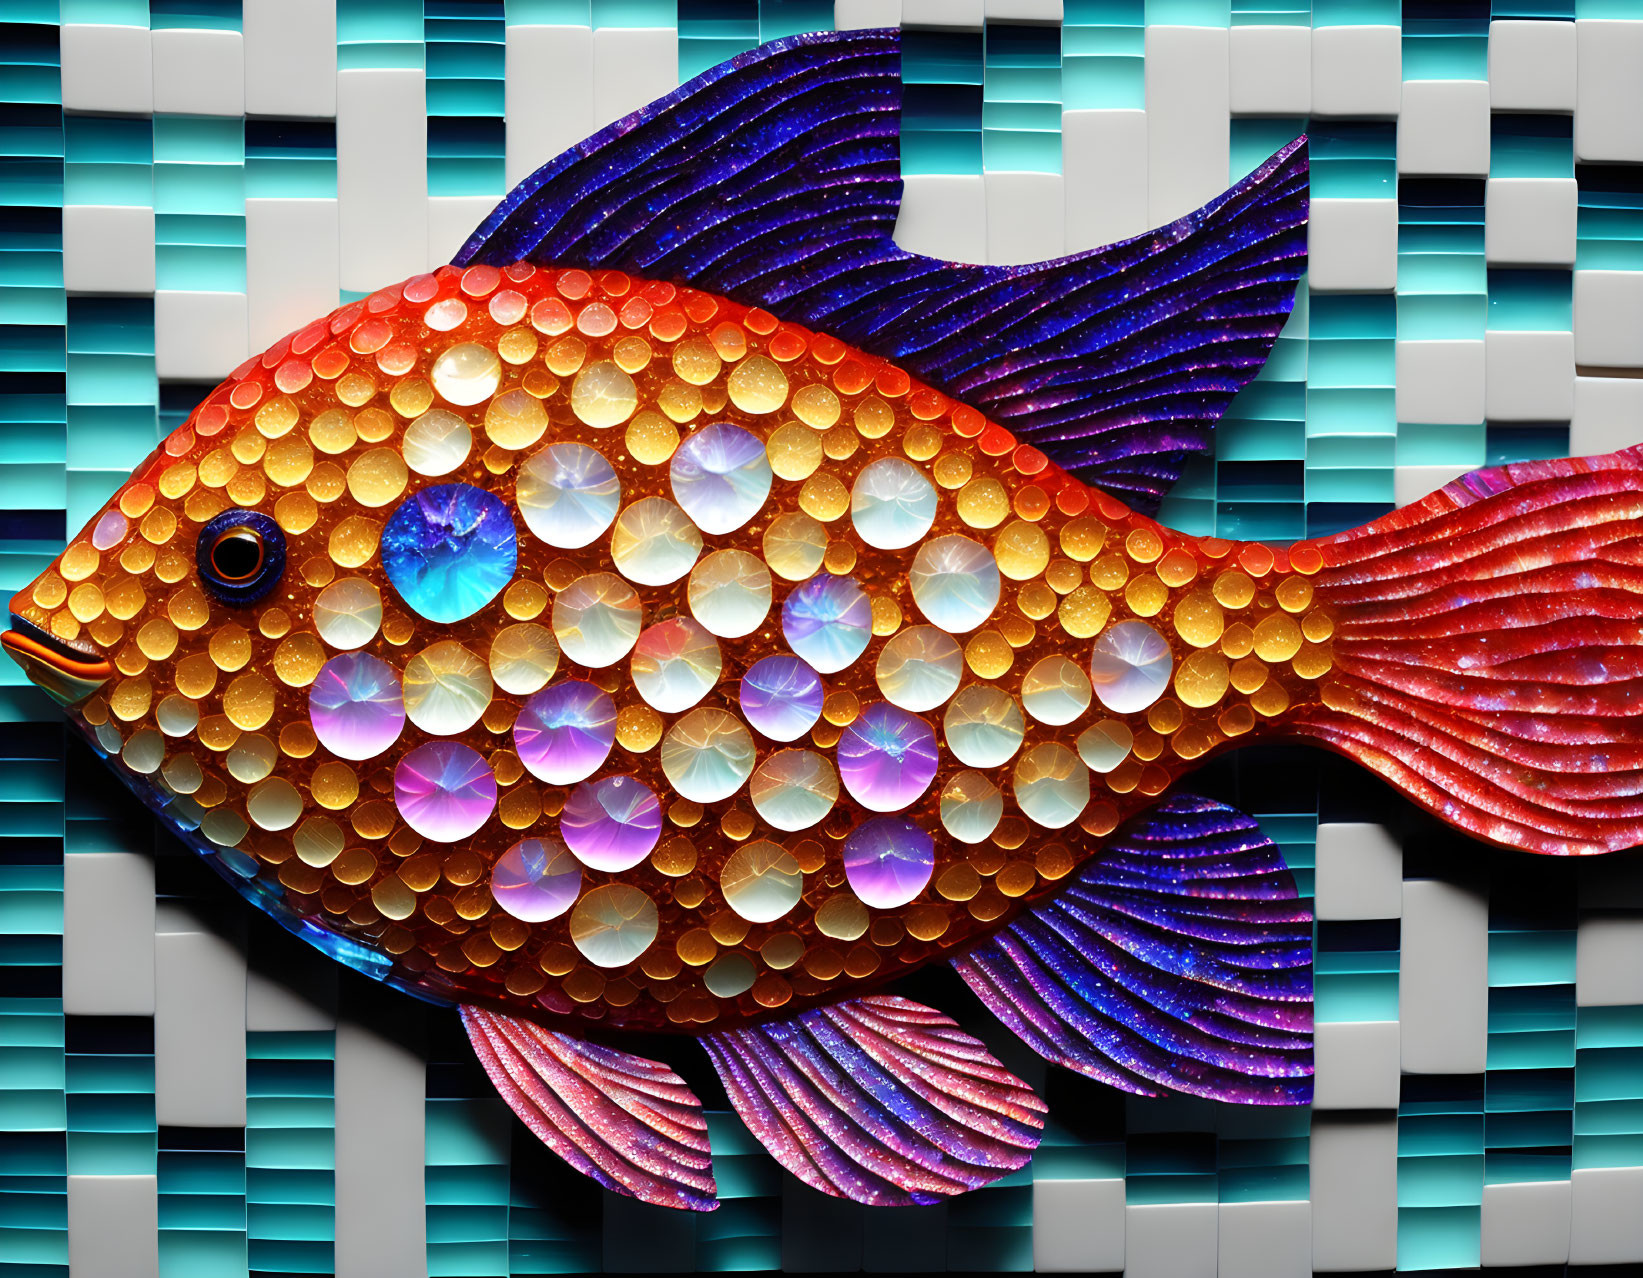 Vibrant Mosaic Fish Artwork with Iridescent Scales